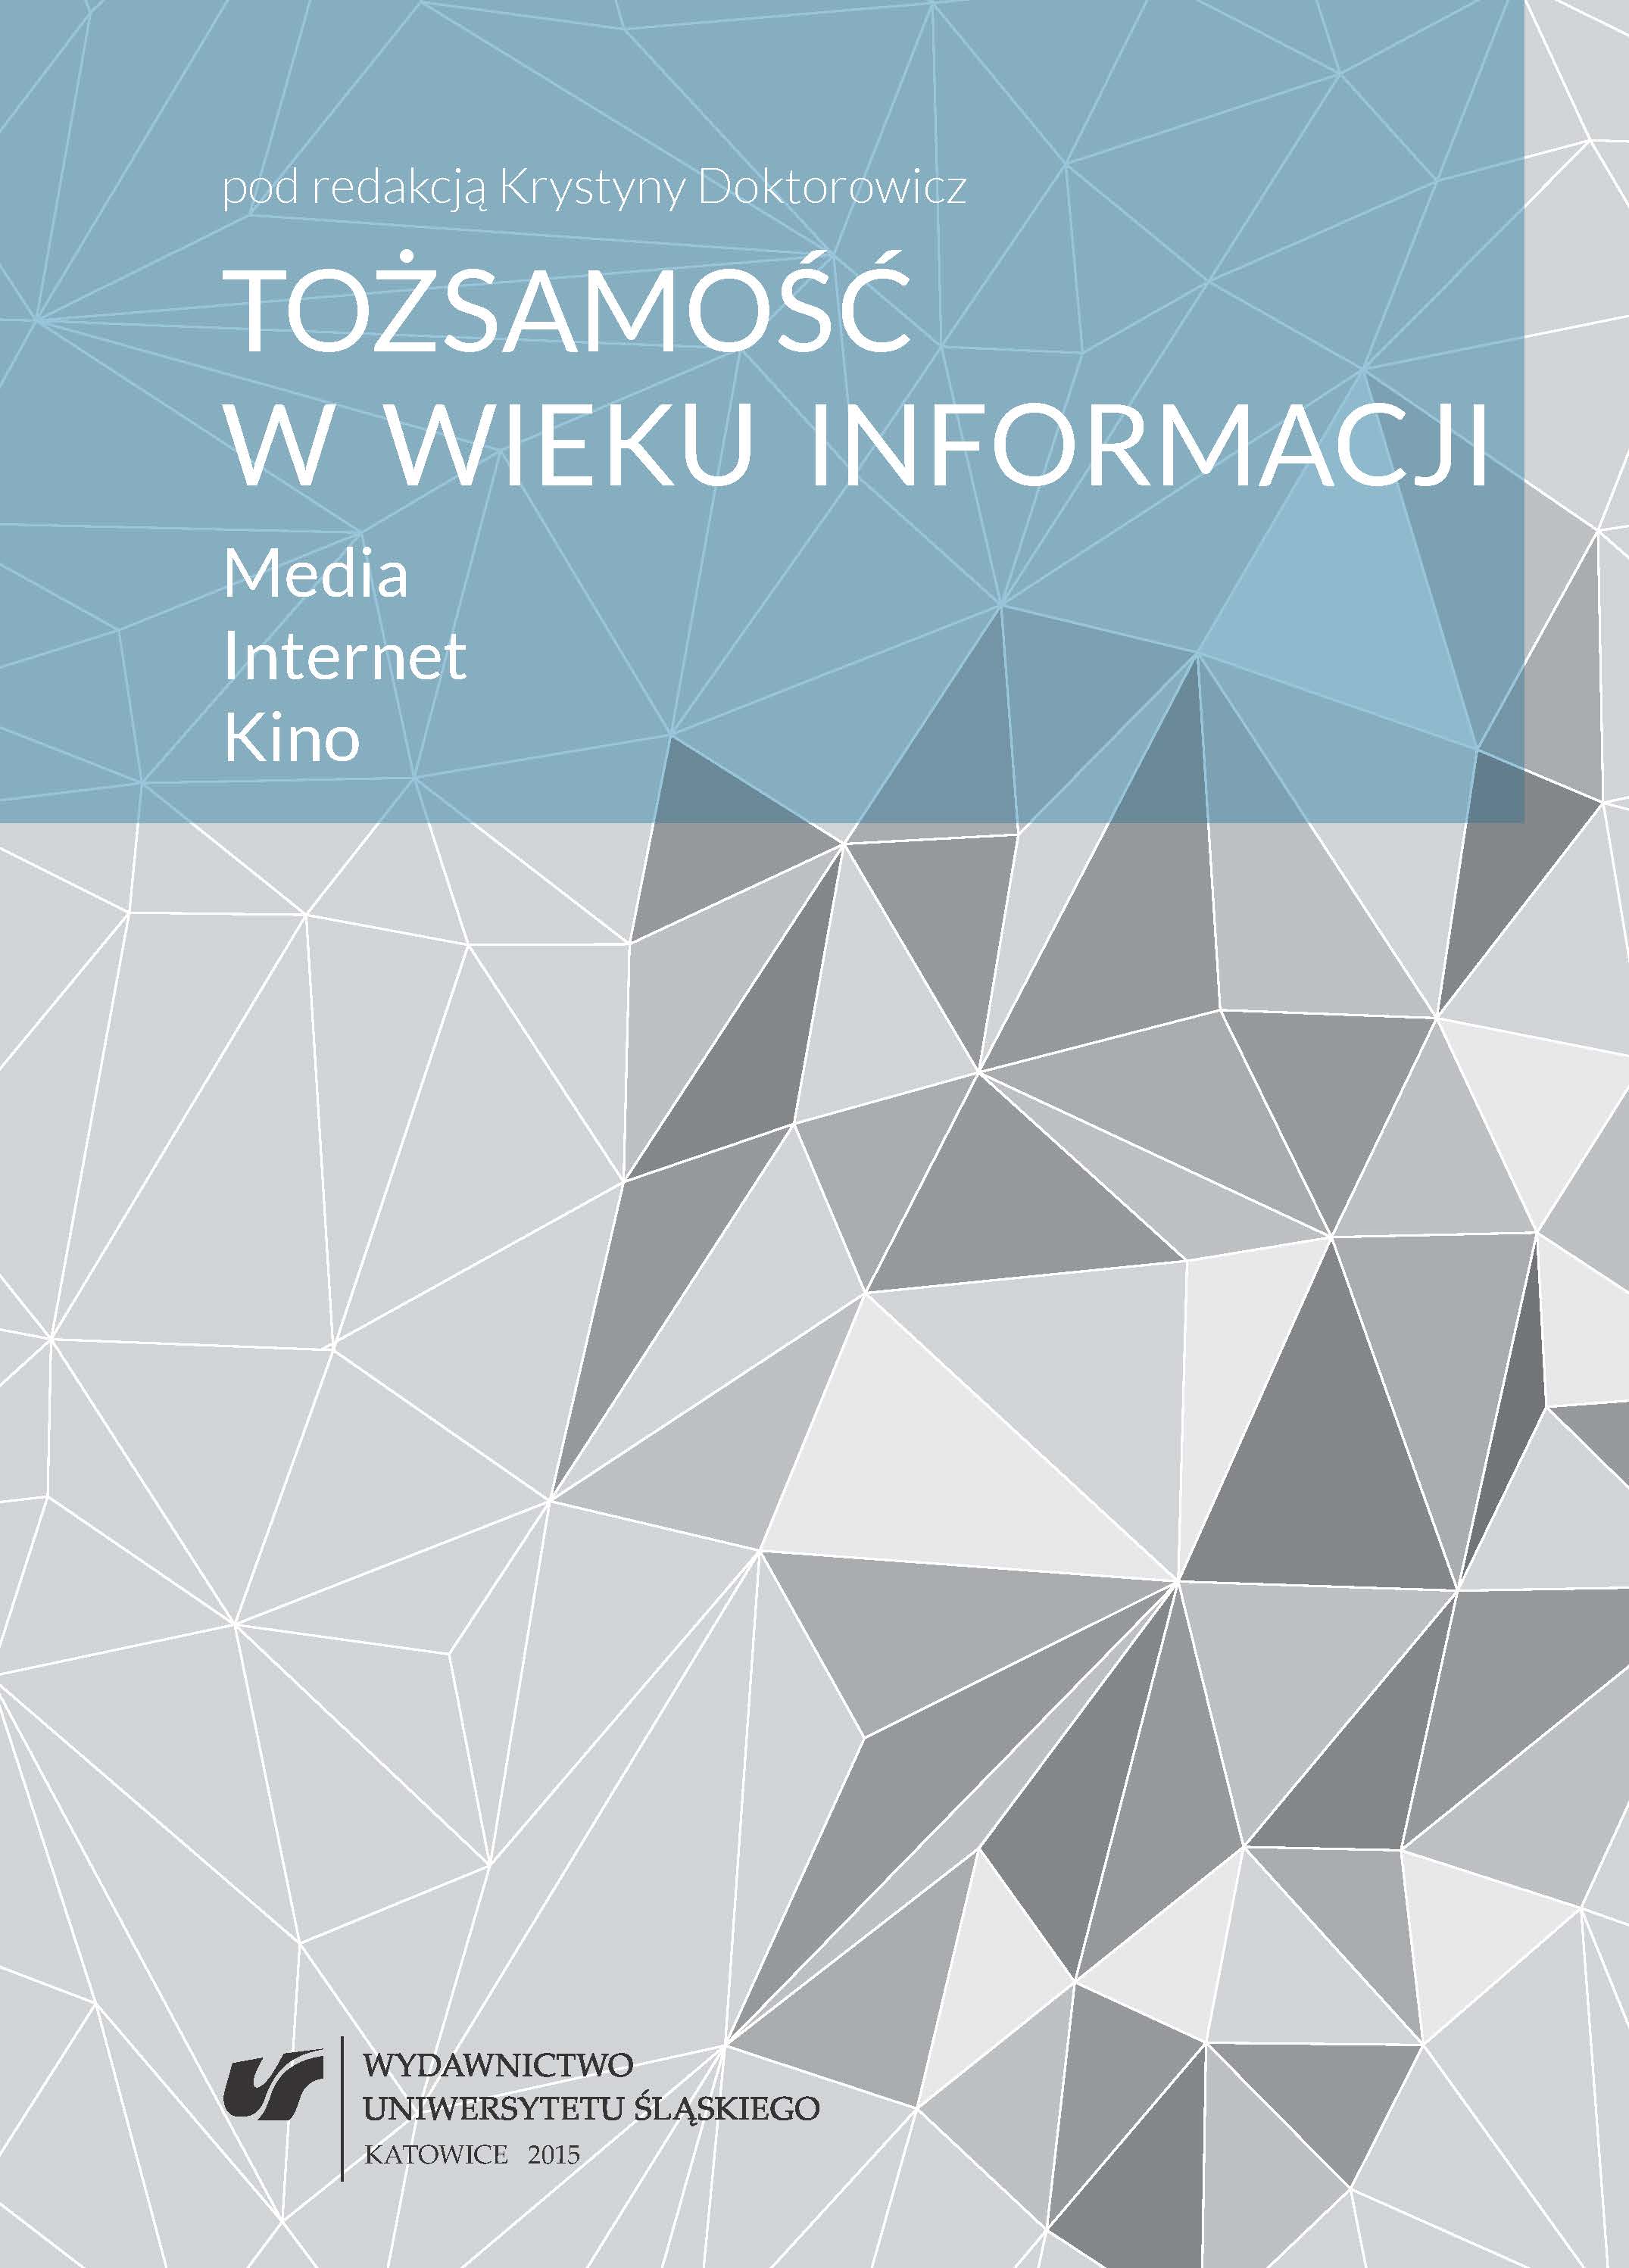 Identity in online Communication of a Brand: Poland Cover Image